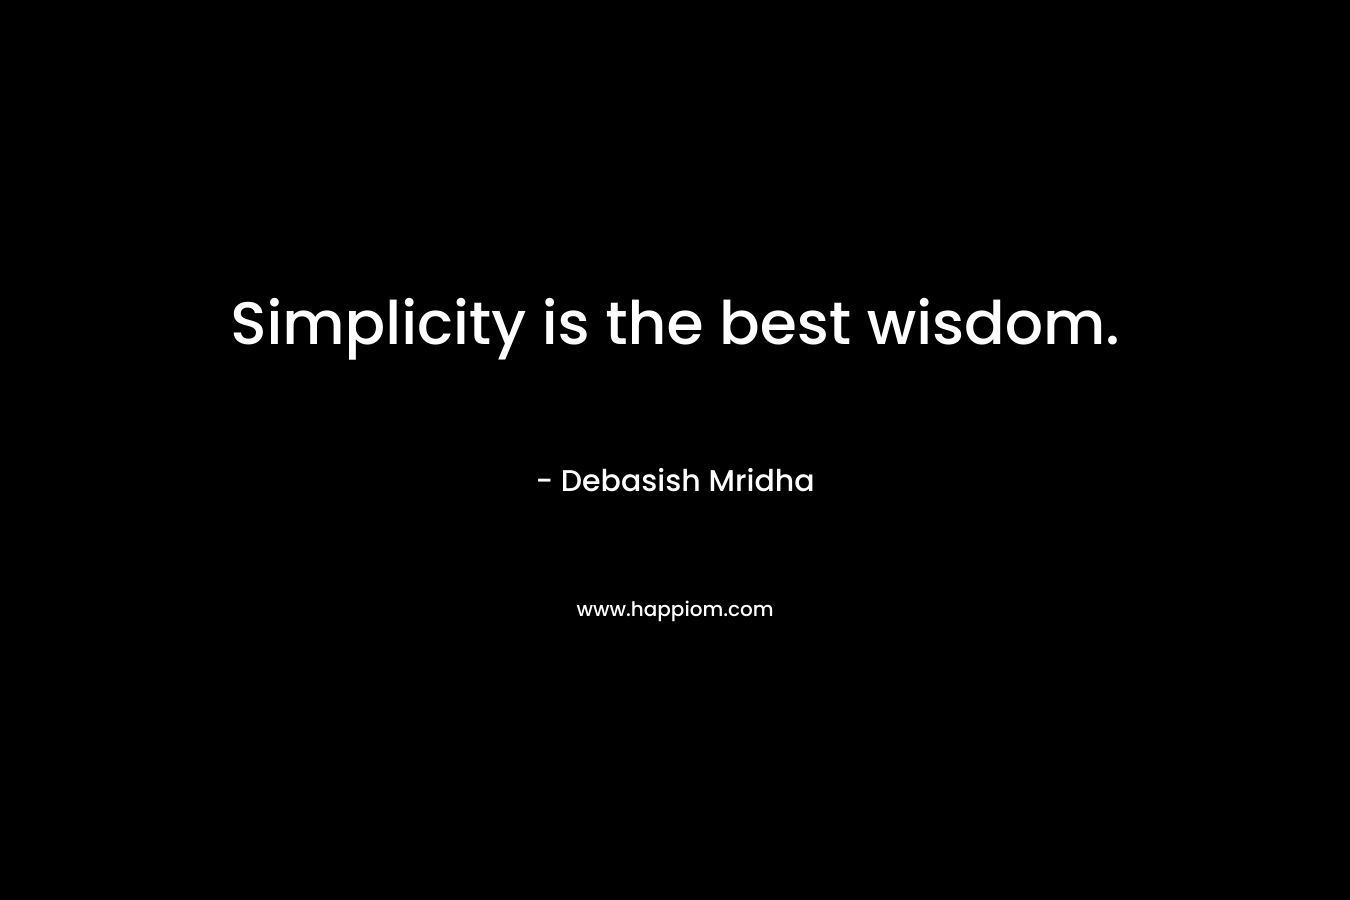 Simplicity is the best wisdom.